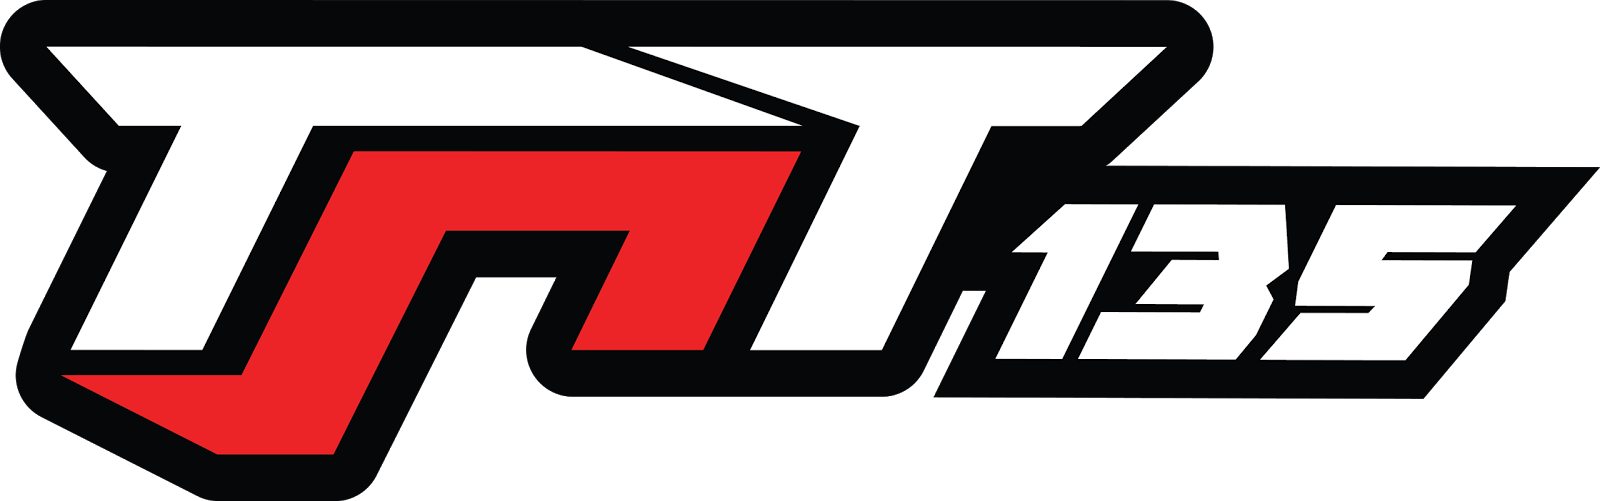 Benelli Tnt 135 Logo Png (1600x501), Png Download